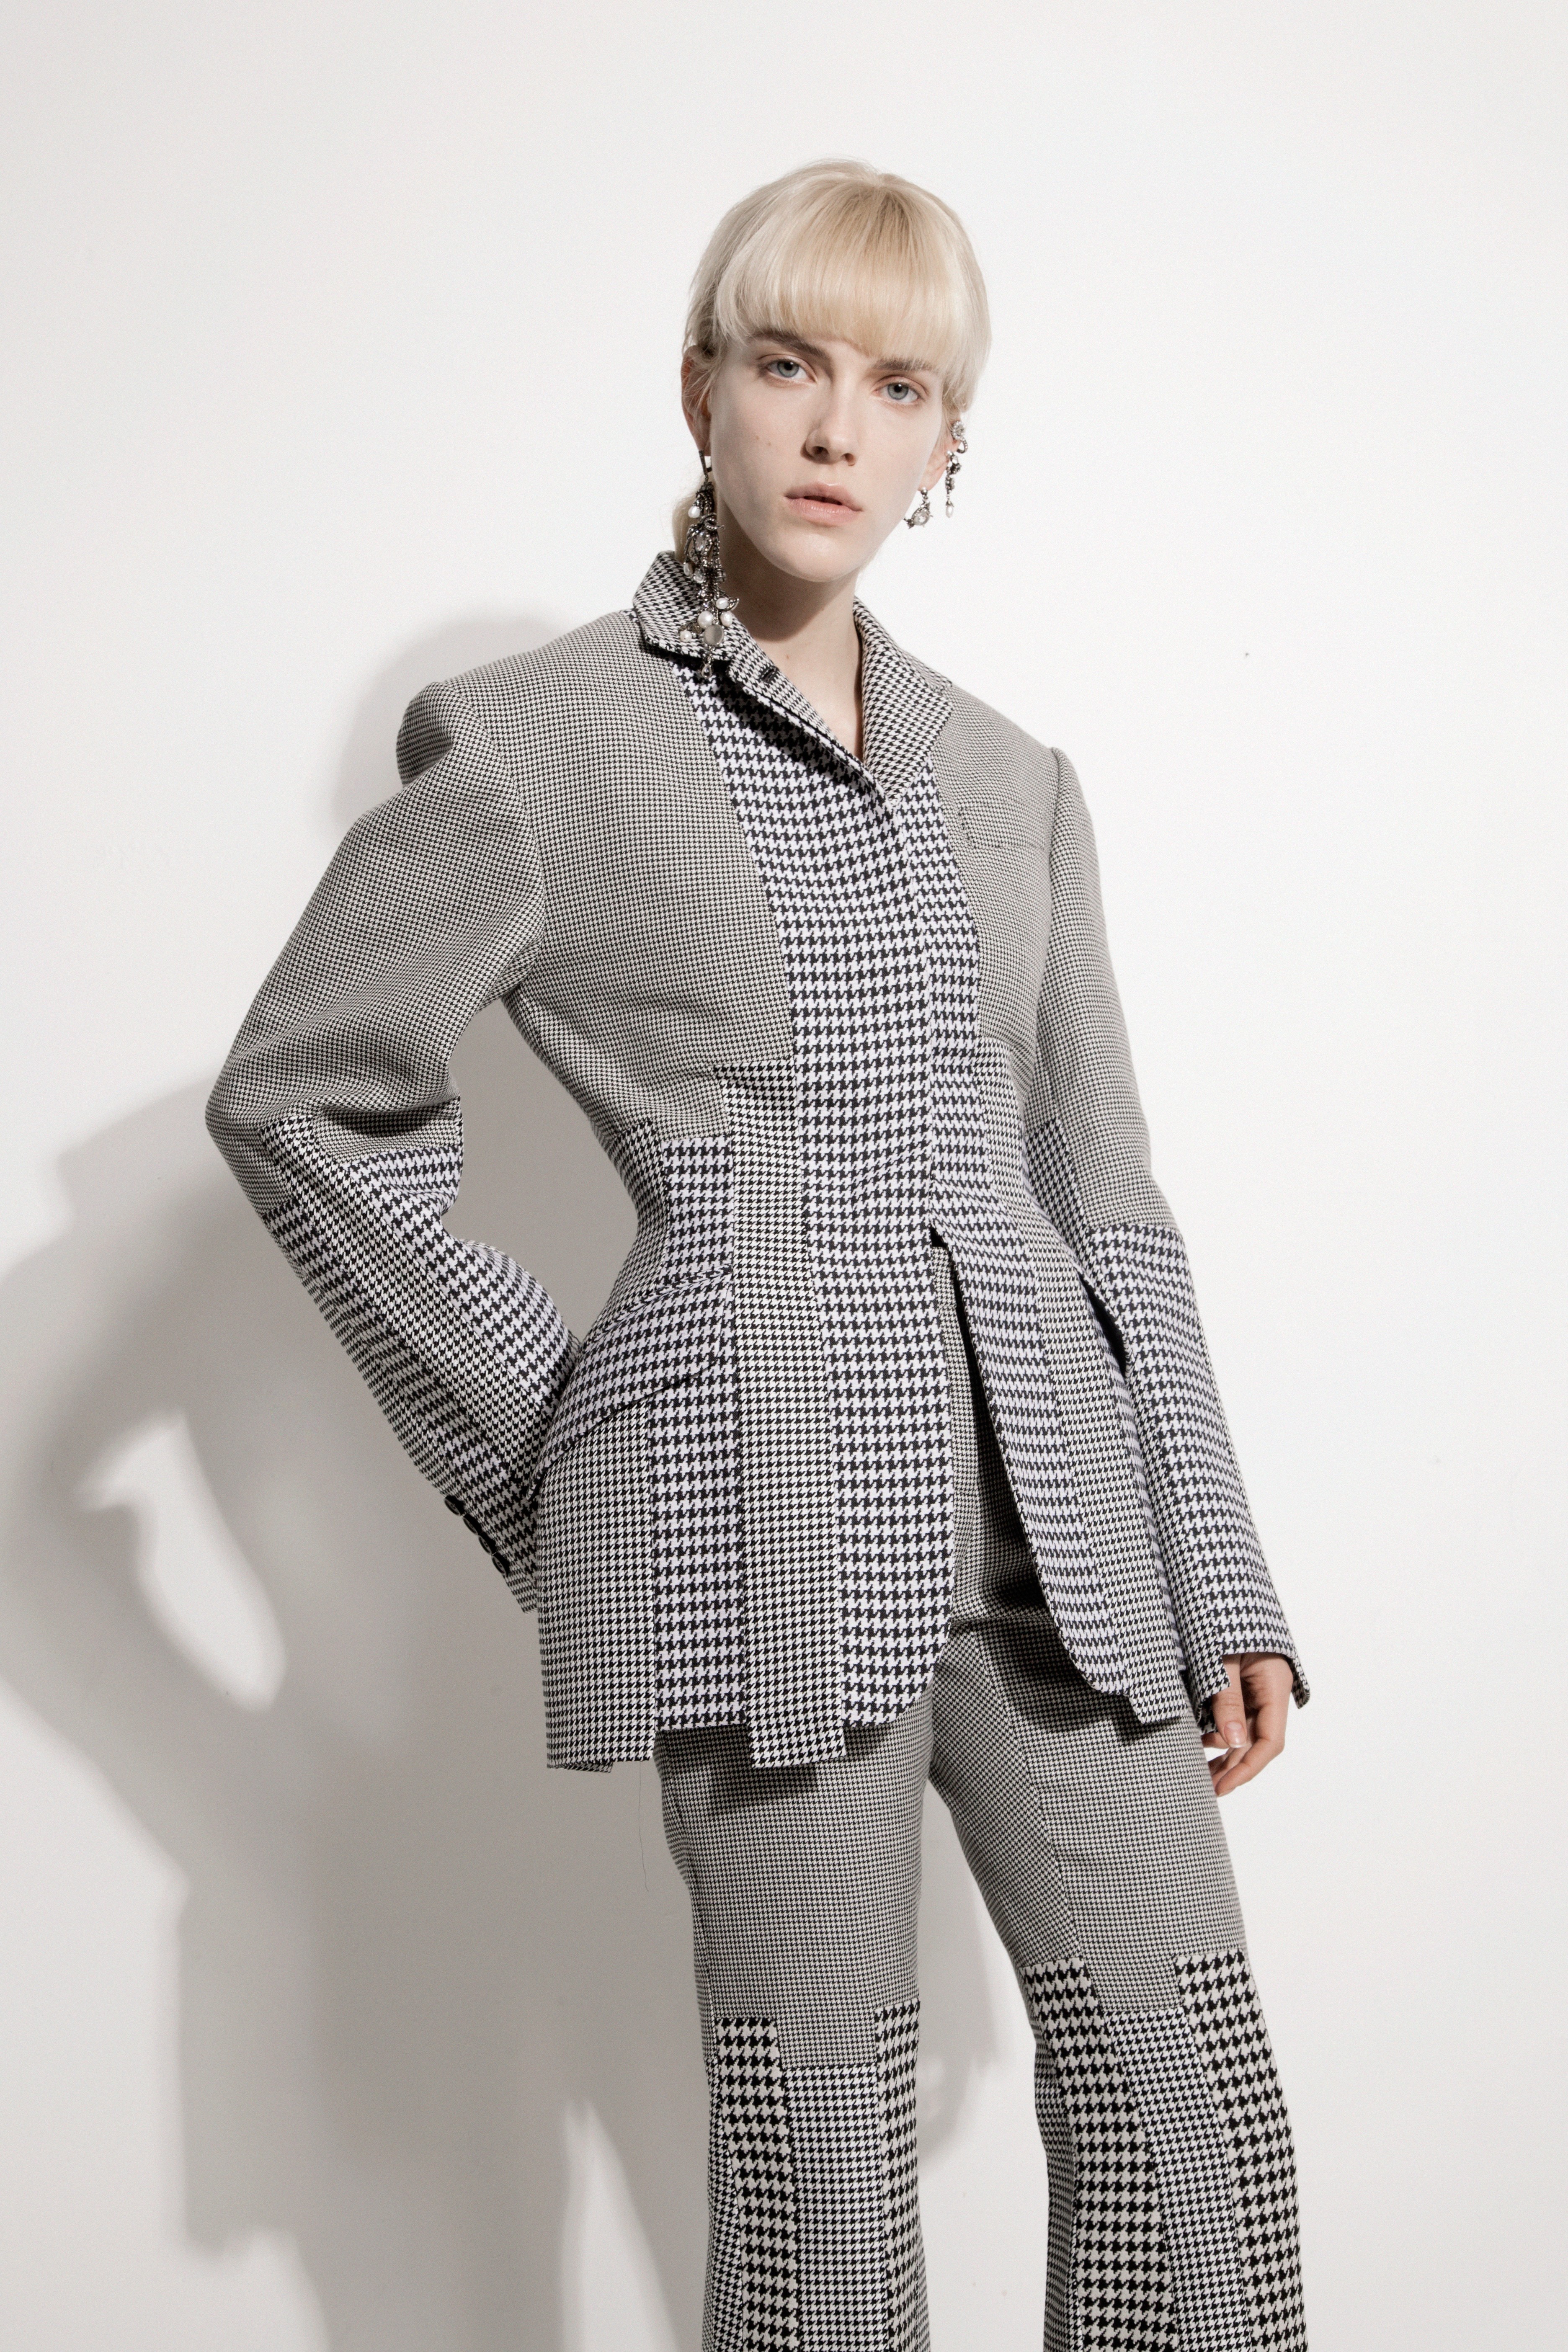 Office attire for women that means business